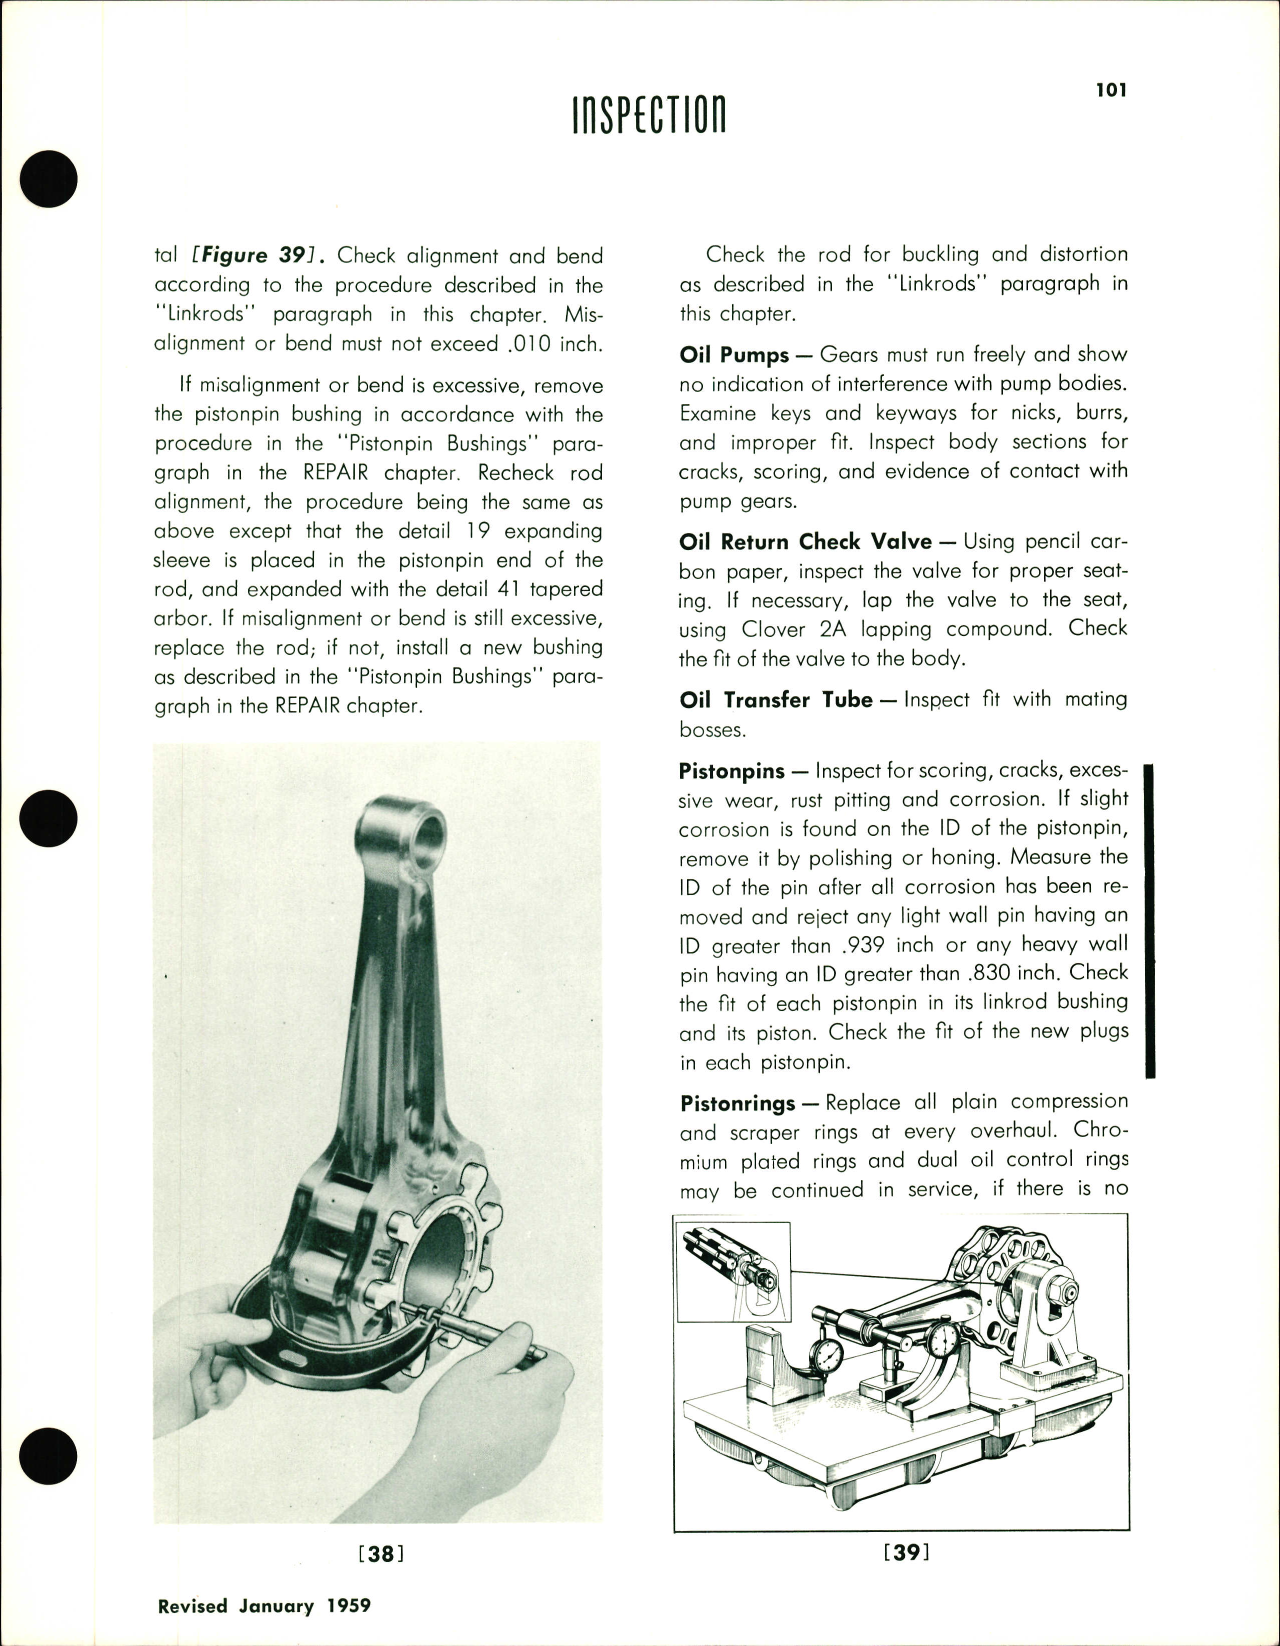 Sample page 7 from AirCorps Library document: Overhaul Manual for Double Wasp CB Series